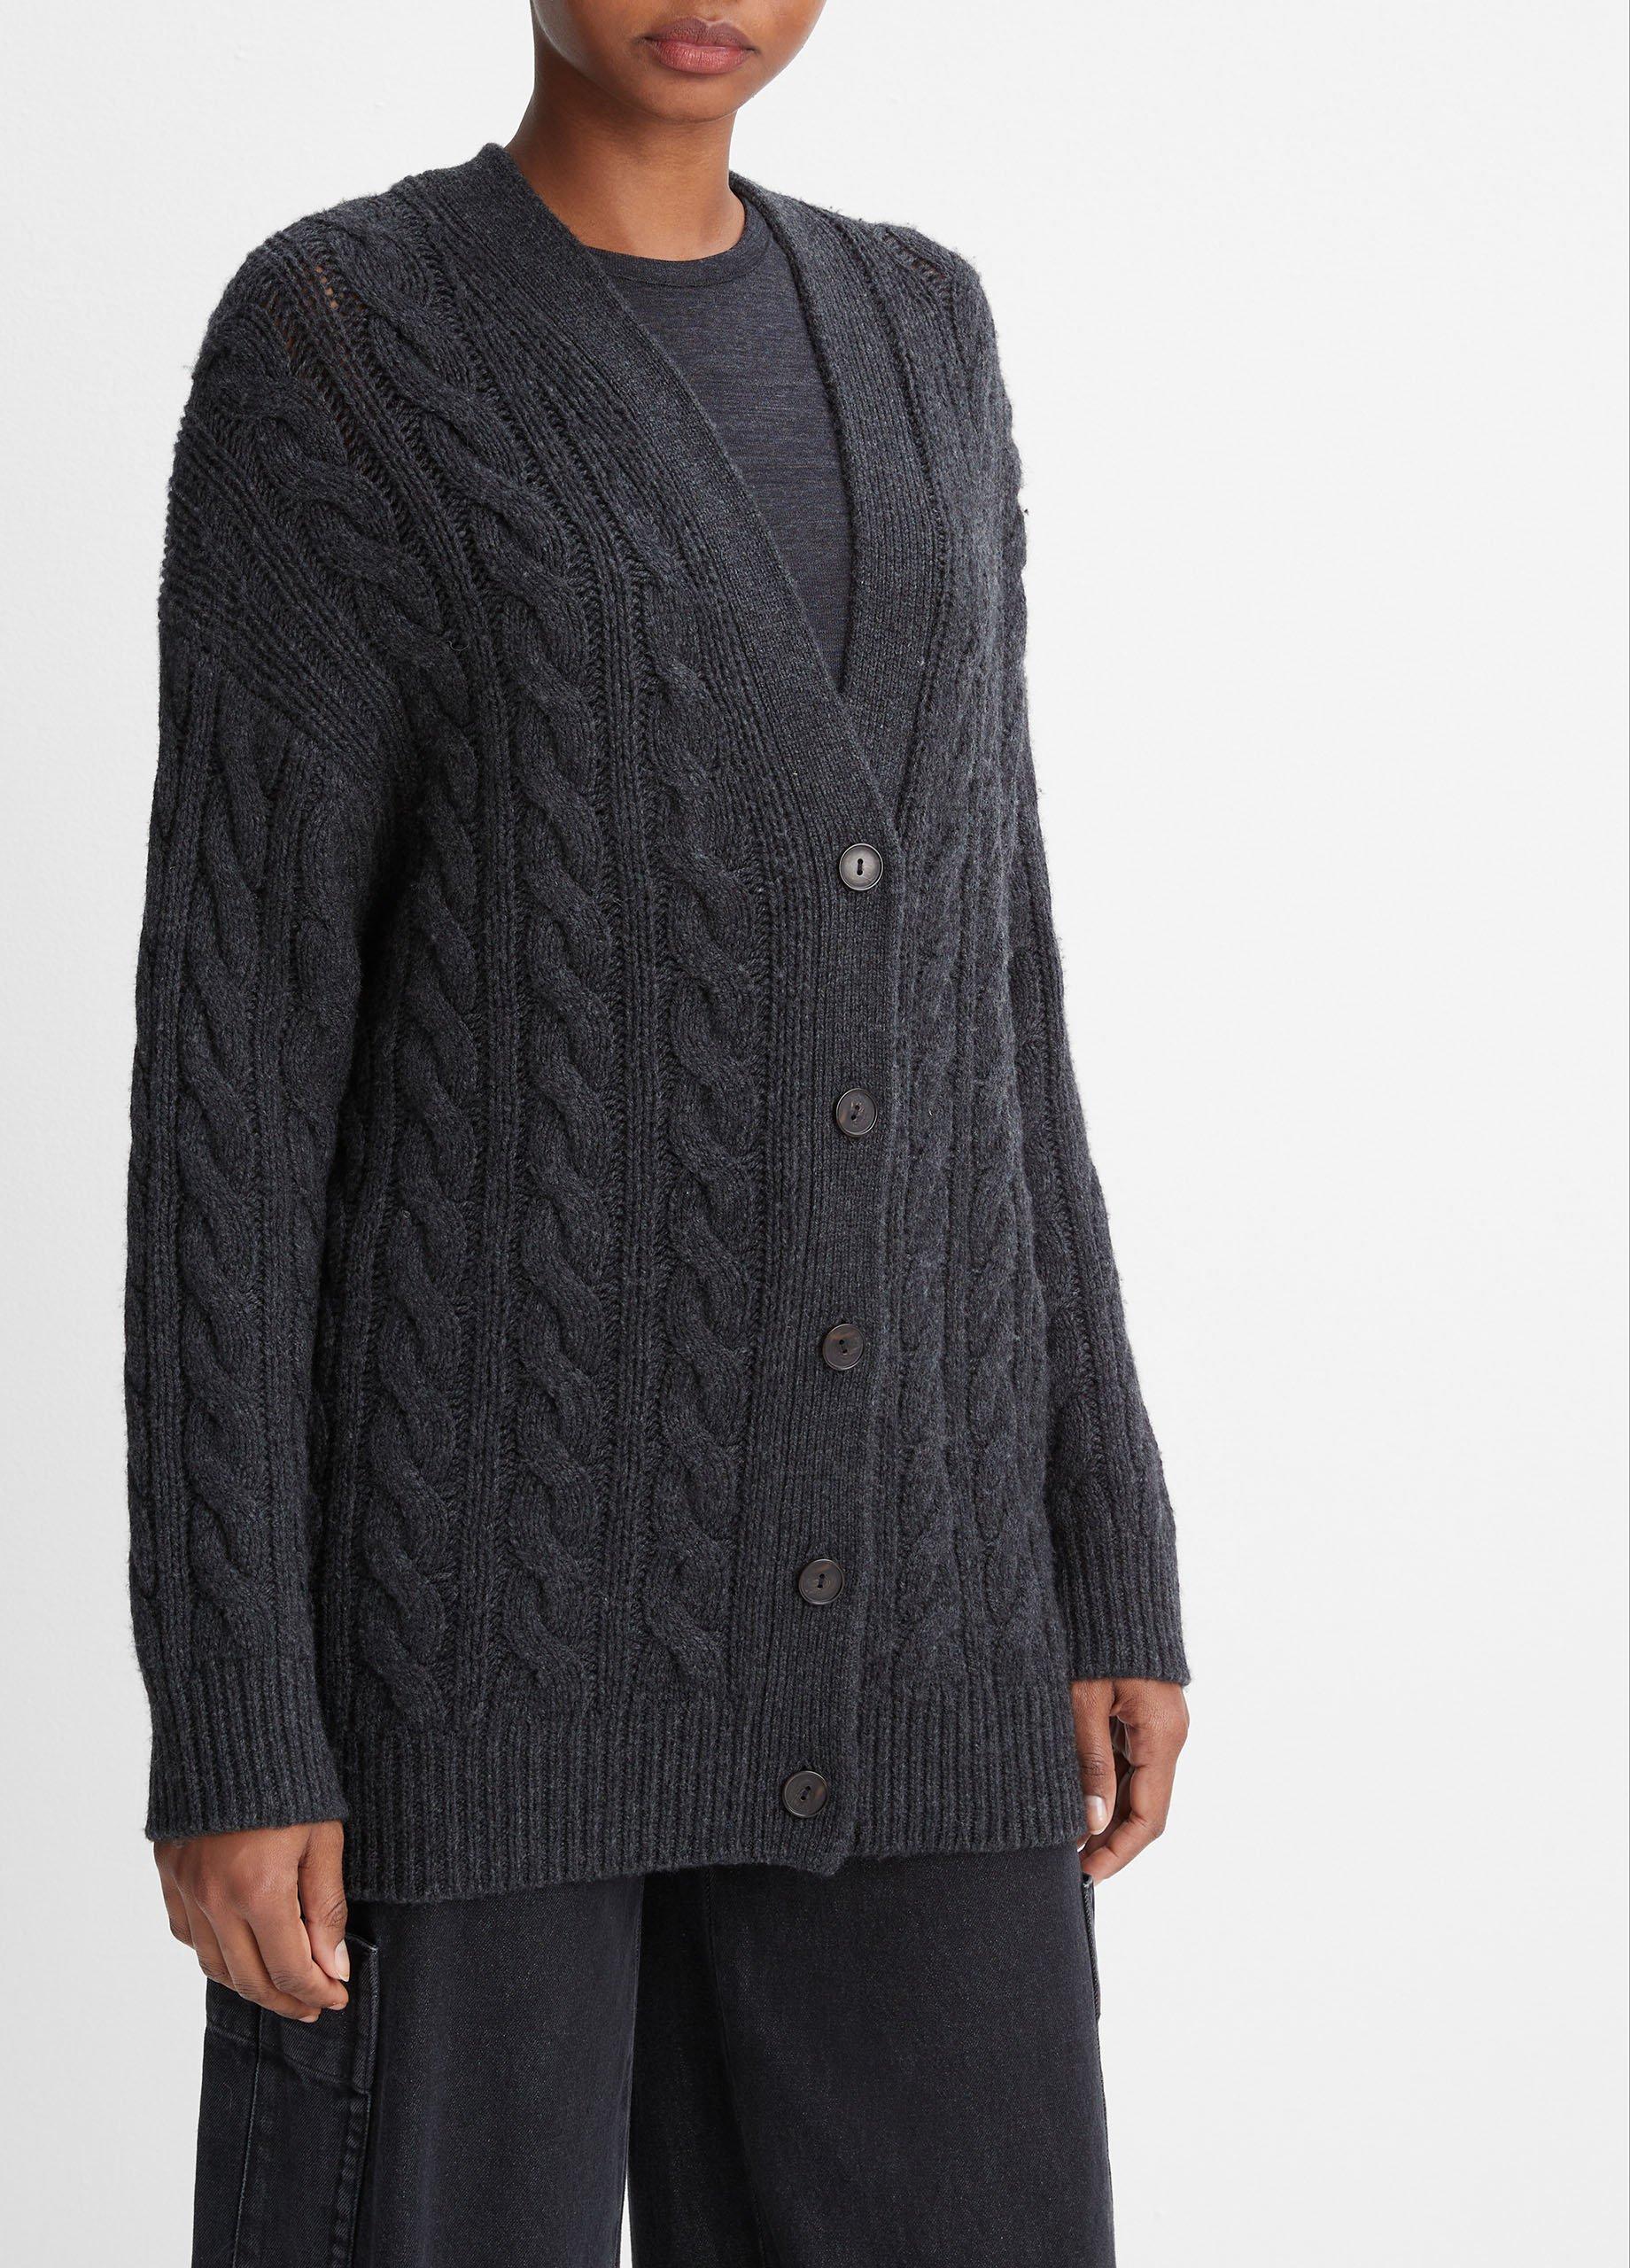 herill for tf cashmerenep cable cardigan あす楽 送料込み 